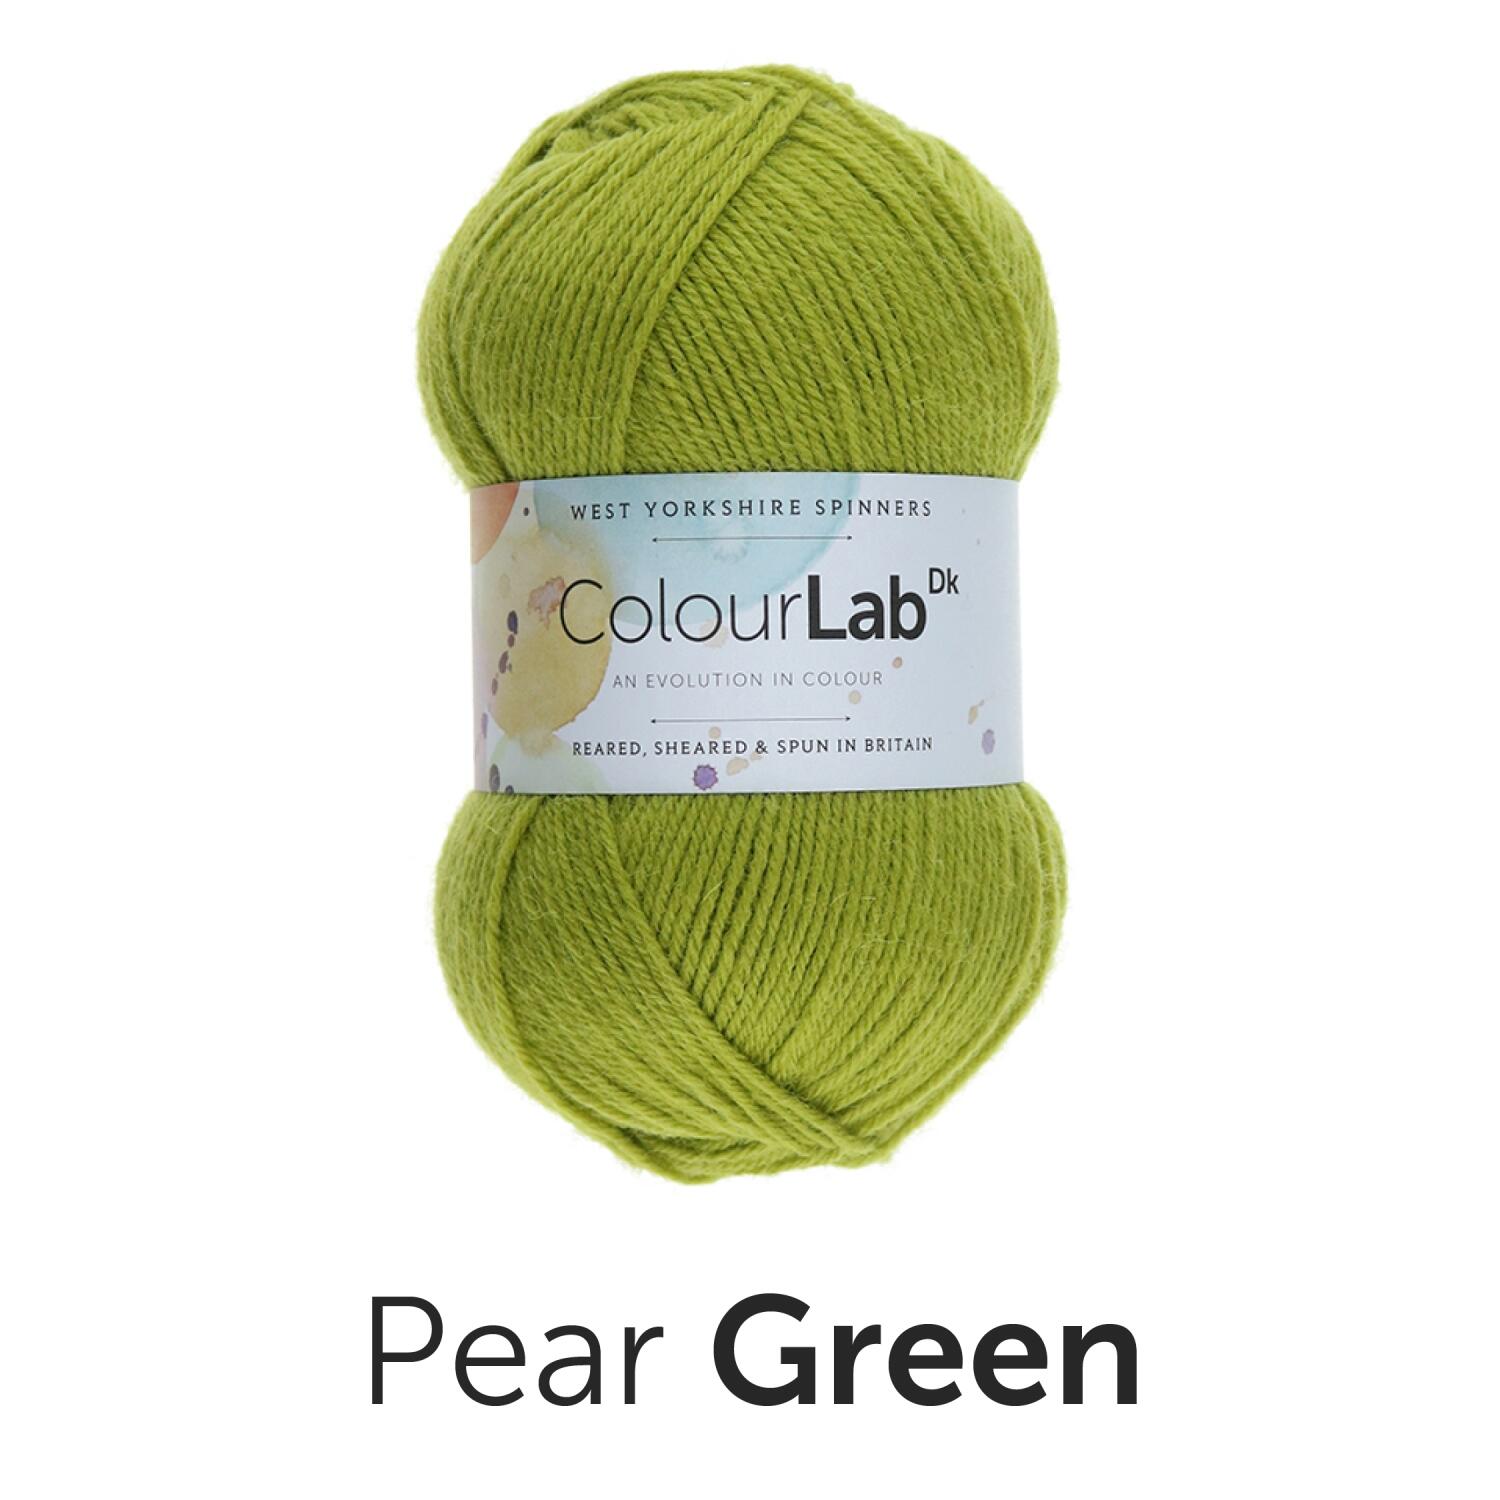 West Yorkshire Spinners ColourLab DK Unis Farbe: 186 pear green